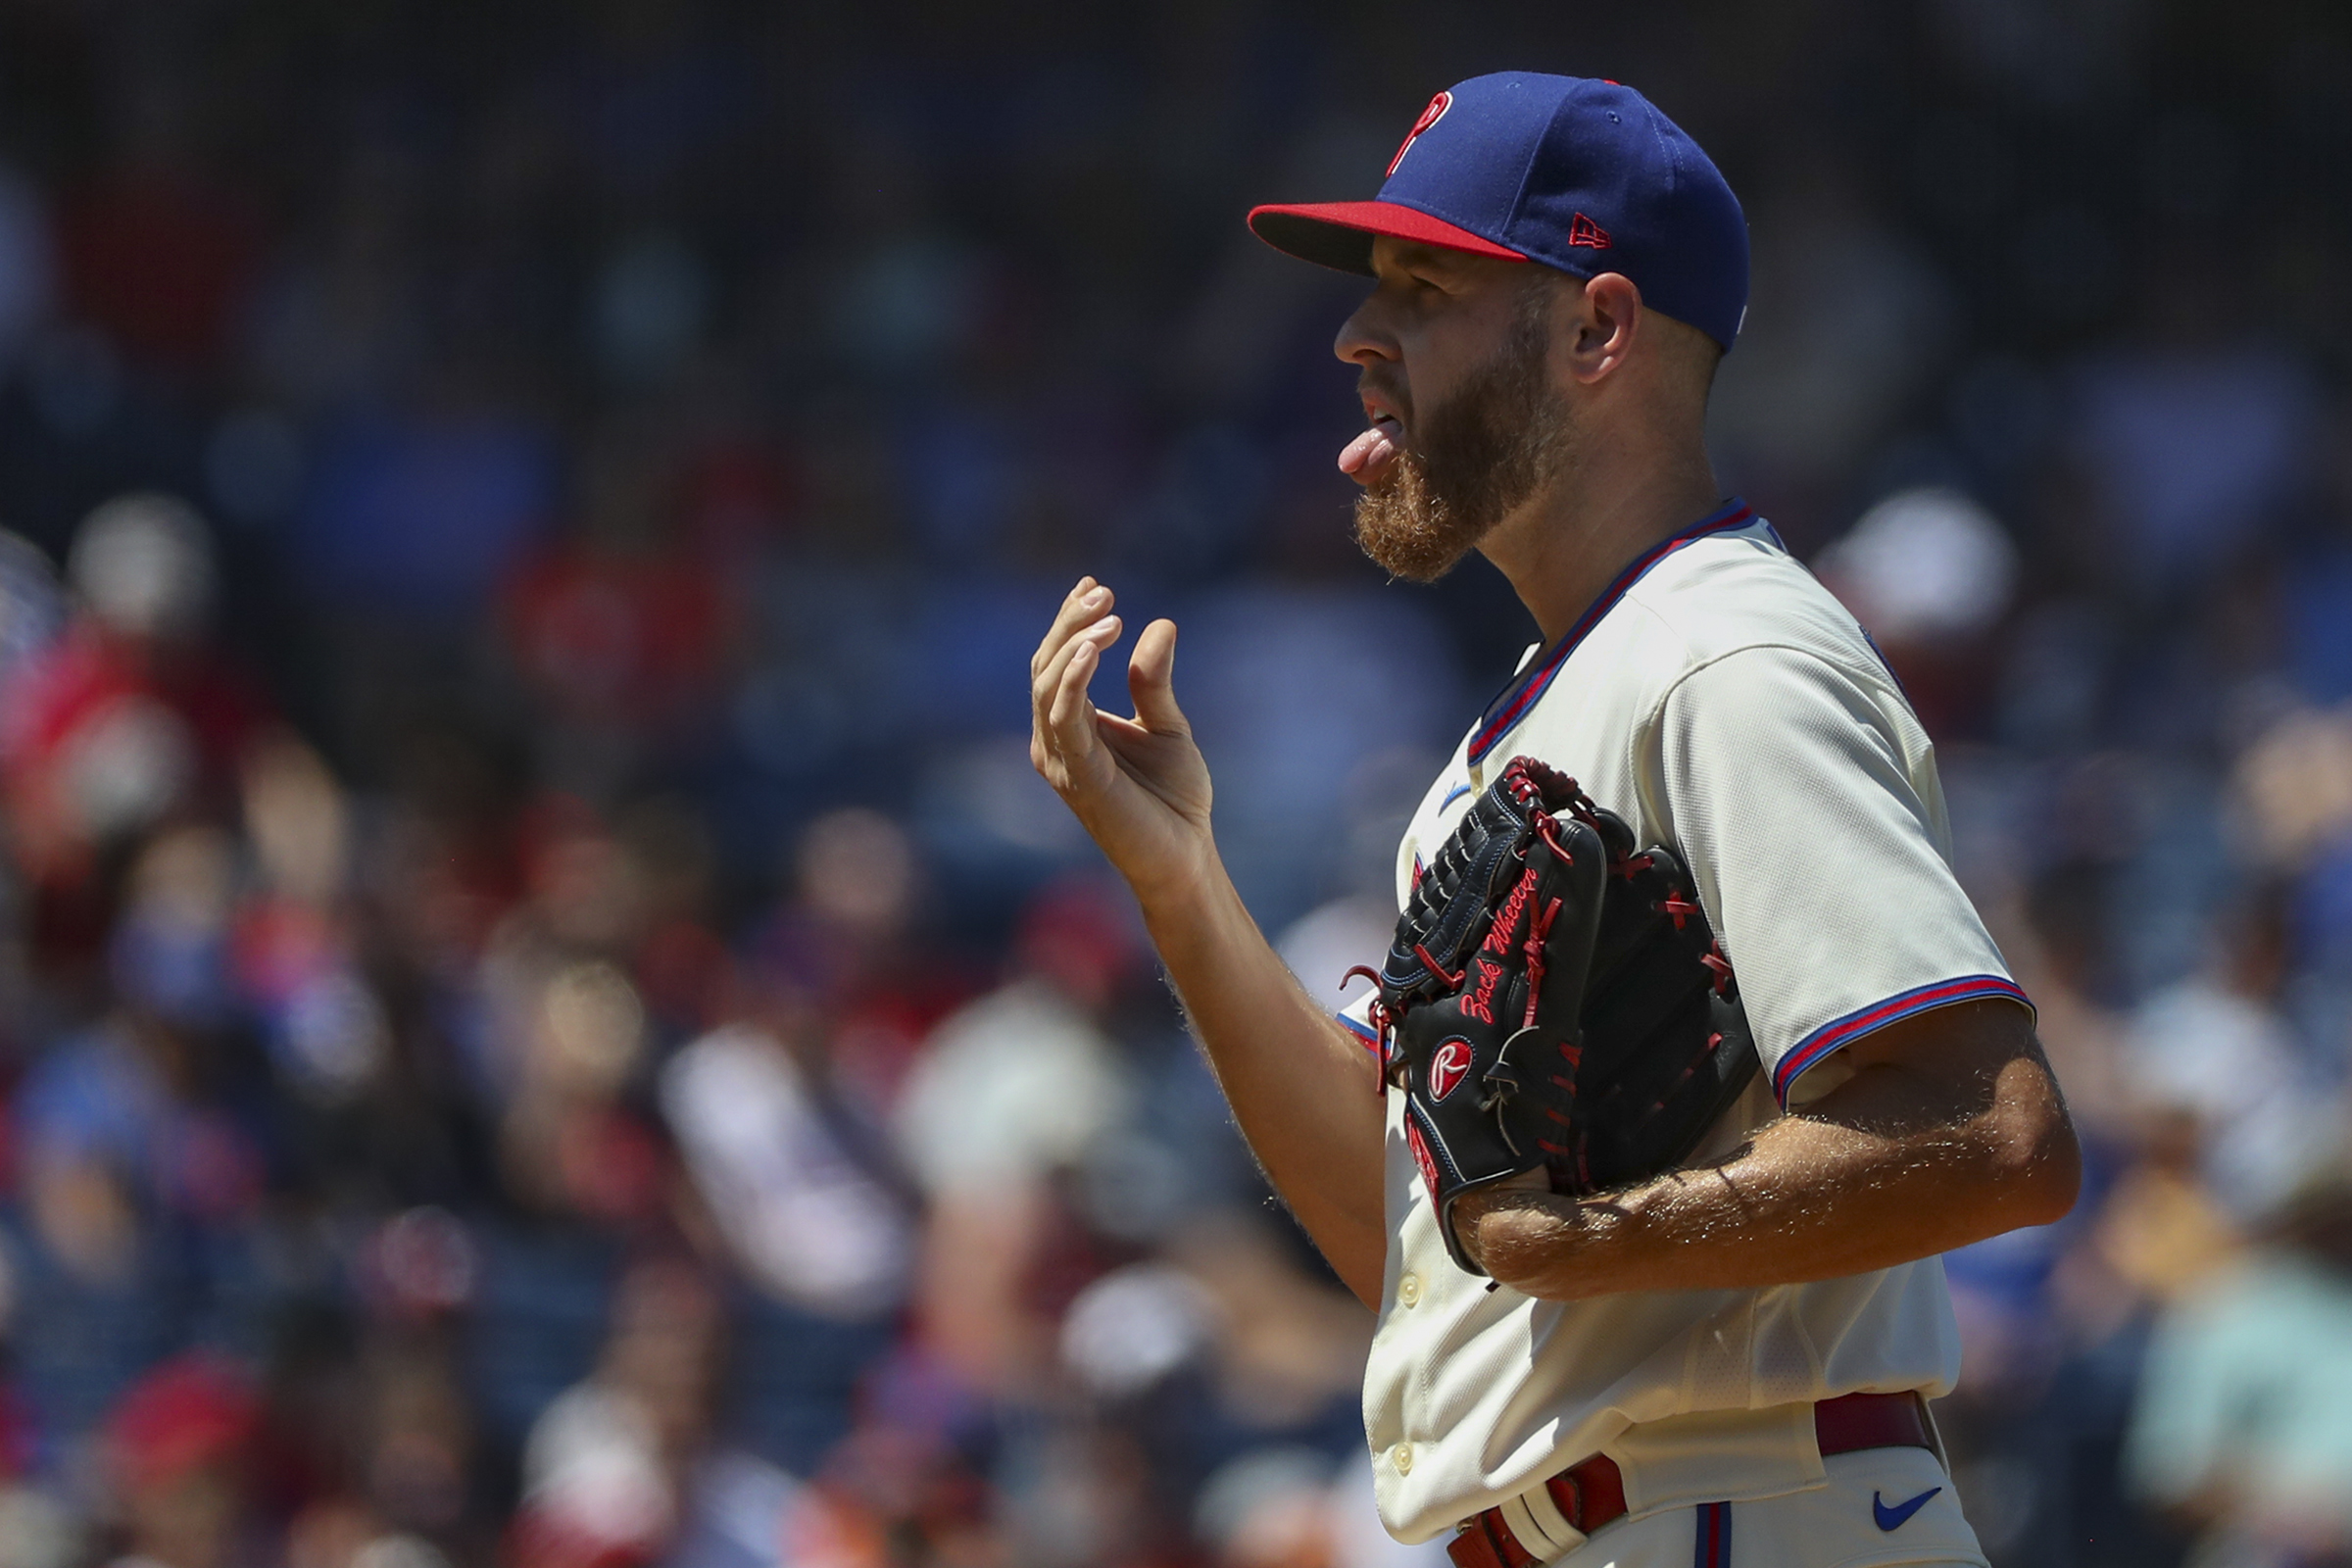 Phillies ace Zack Wheeler still has soreness in his injured right